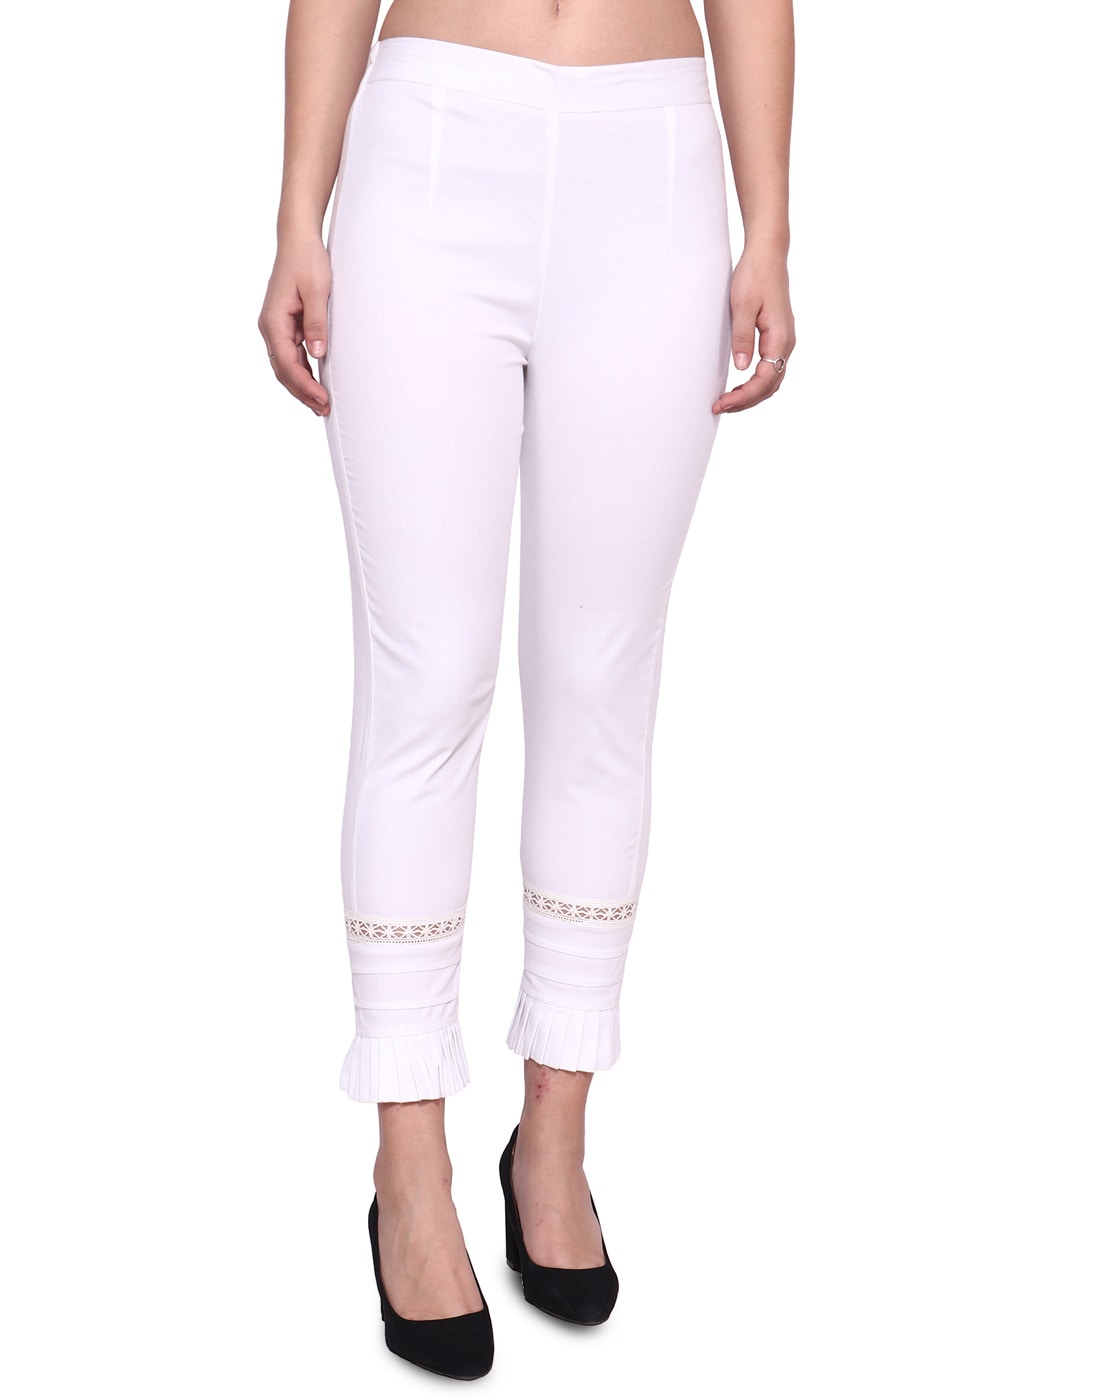 White Straight Pants With Lace Work On Flares  cotrasworld